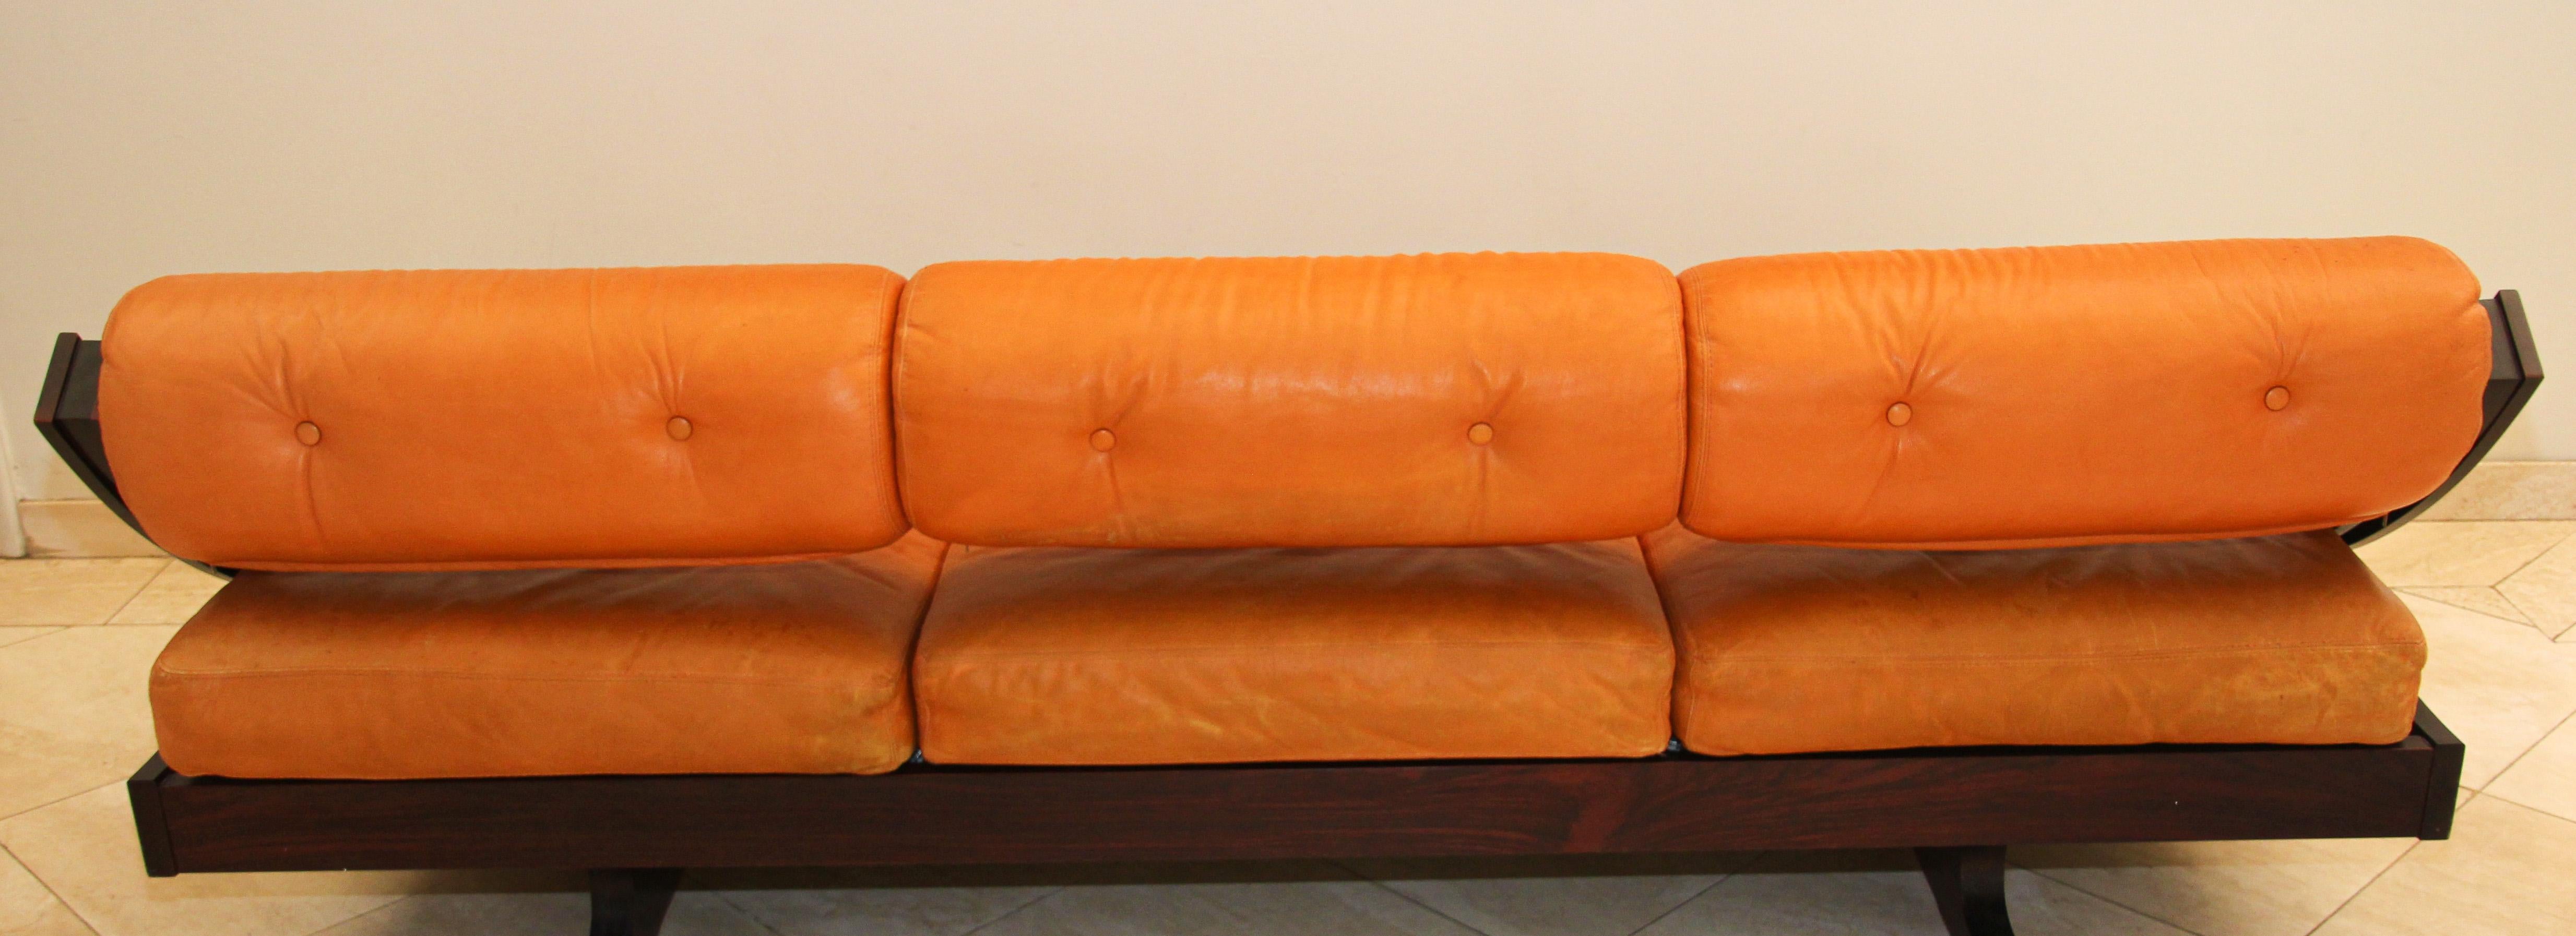 Gianni Songia Leather Daybed and Sofa for Sormani, Italy, 1963 For Sale 3